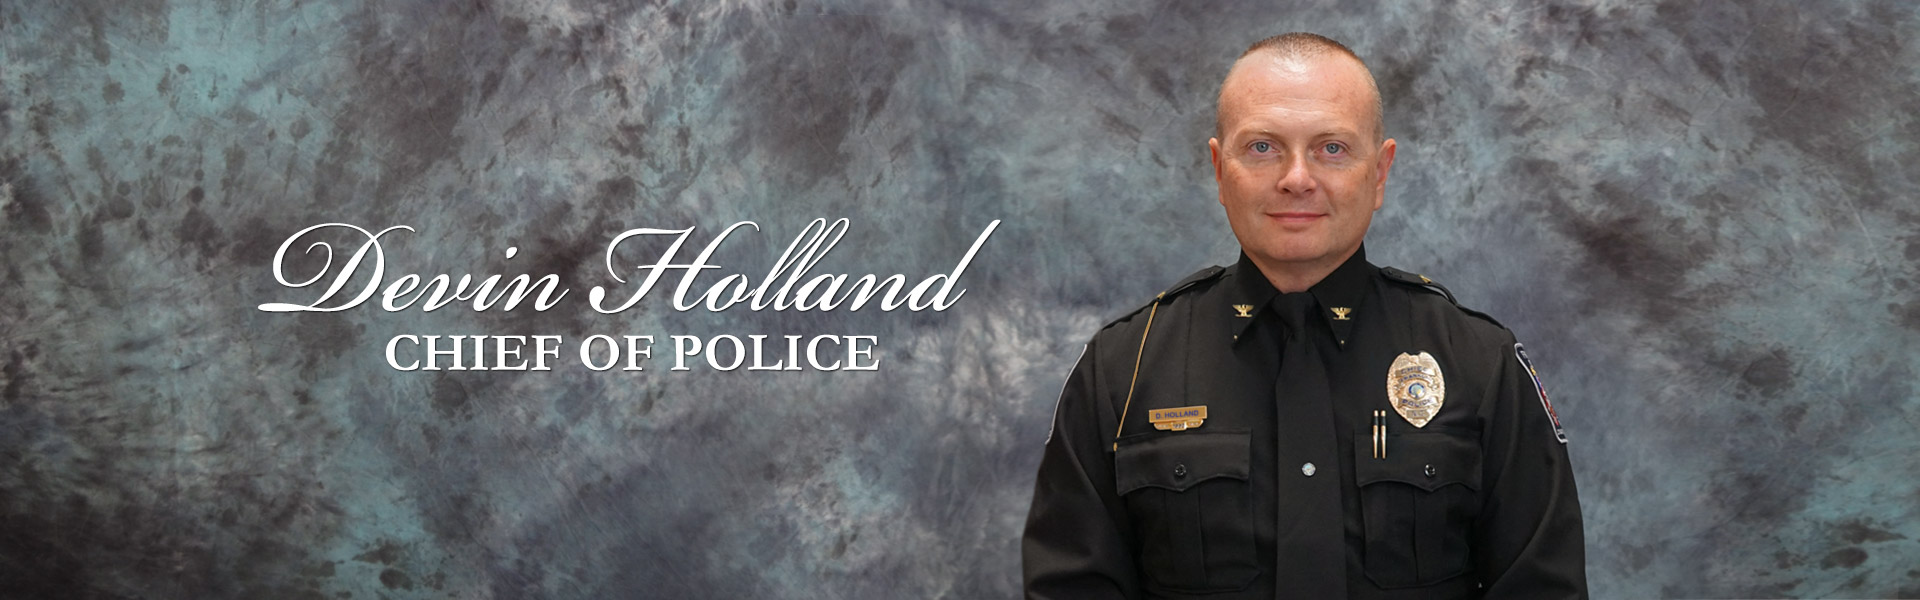 Franklin NC Chief of Police Devin Holland